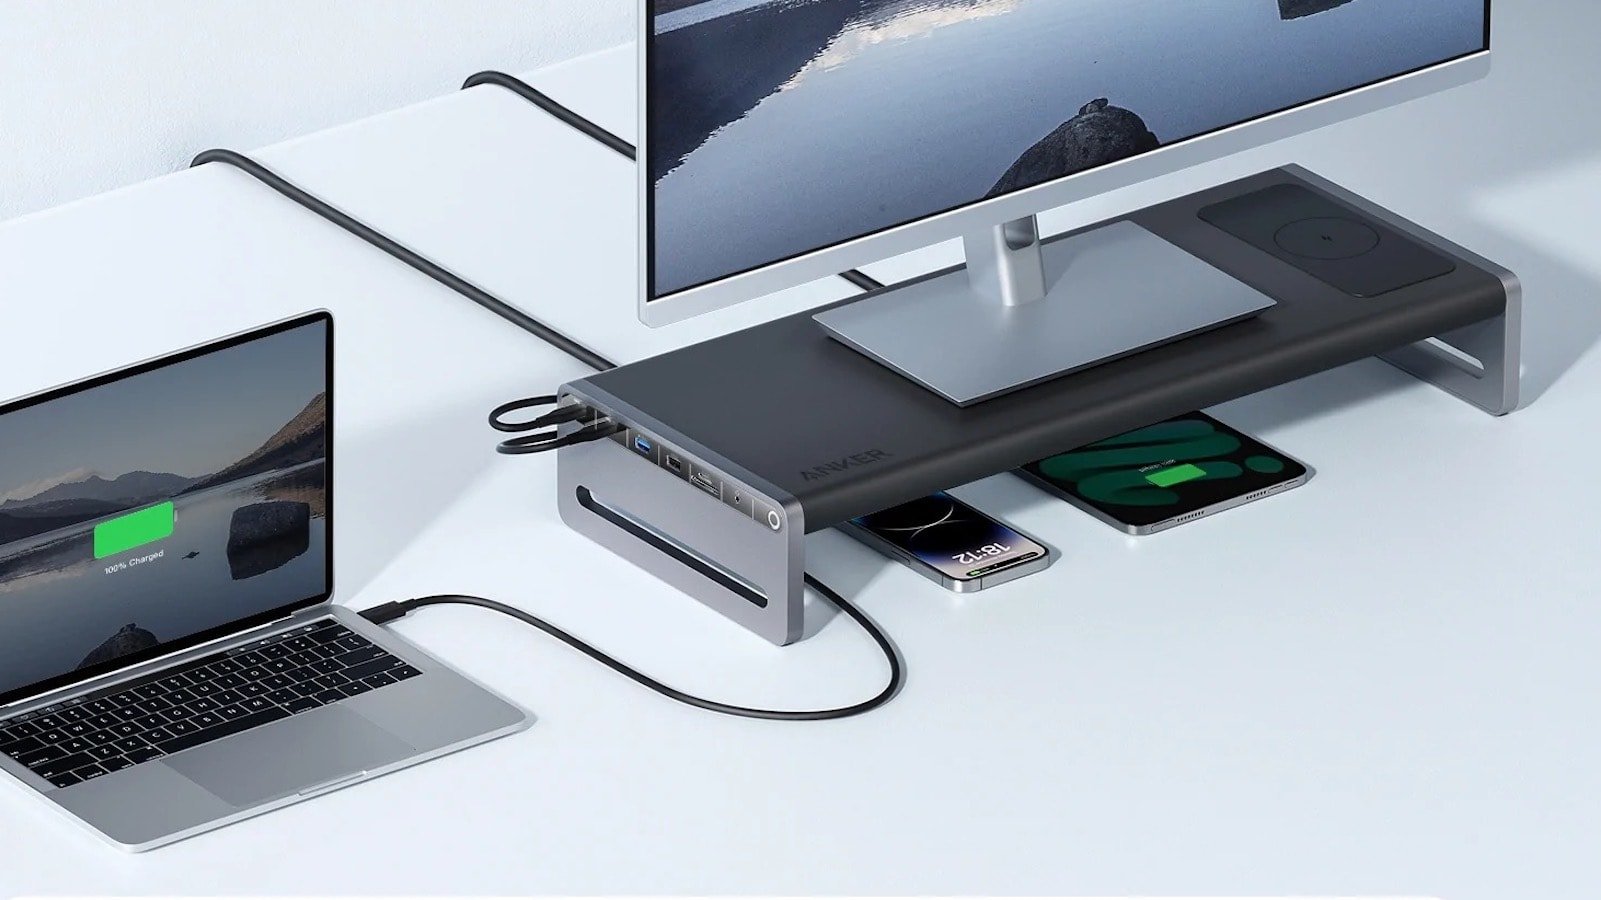 Anker 675 USB-C Docking Station gives you up to 100 watts from its upstream port